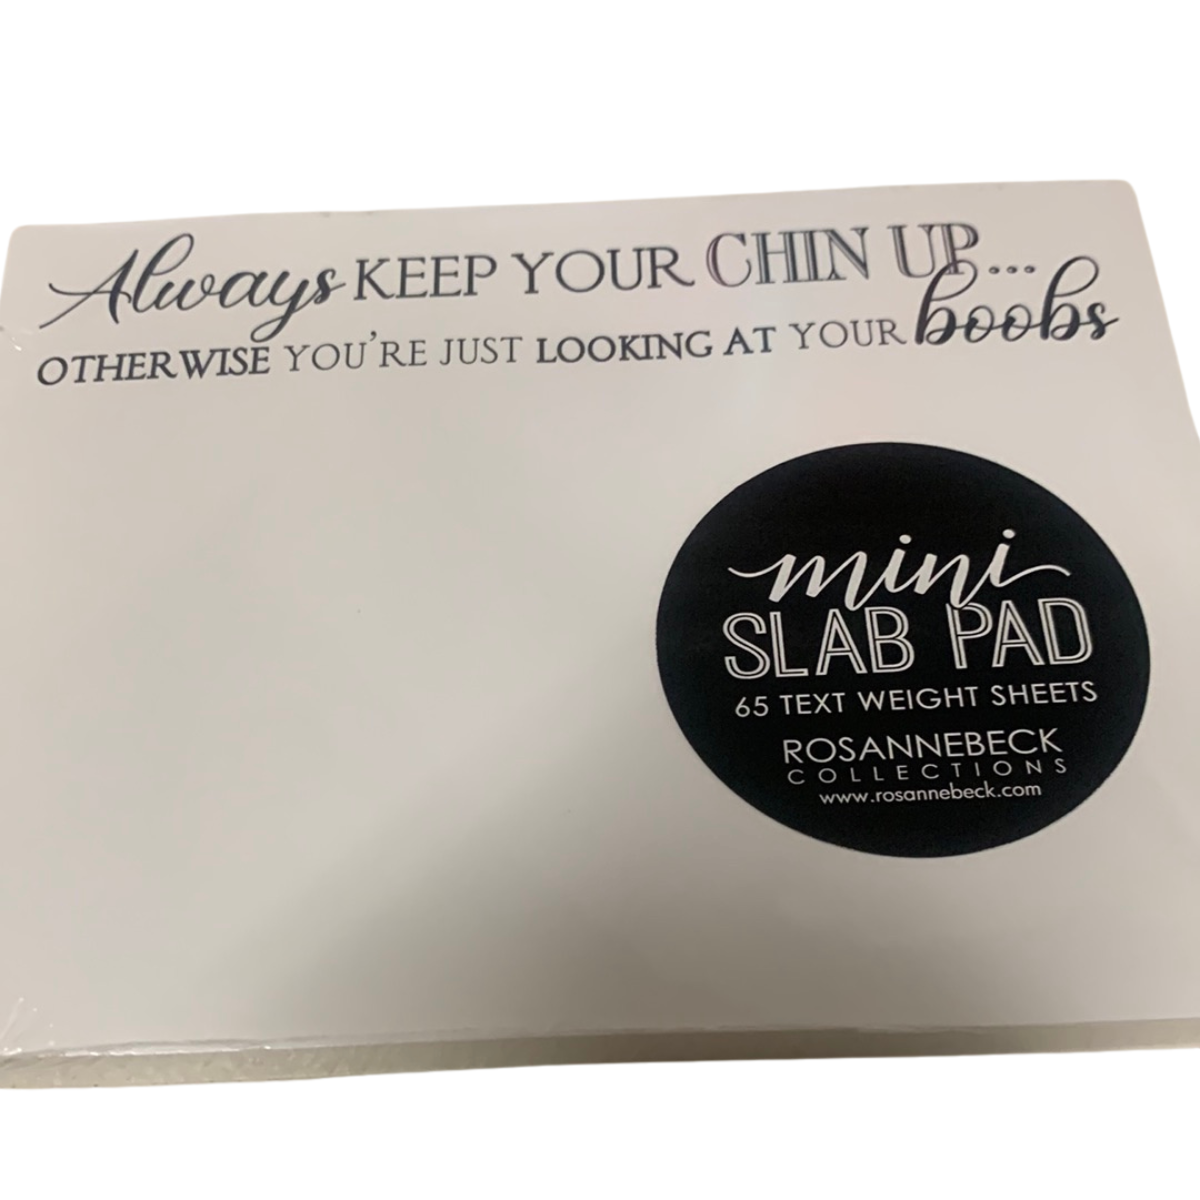 Mini Slab Pad - Always Keep Your Chin Up...Otherwise You're Just Looking at Your Boobs